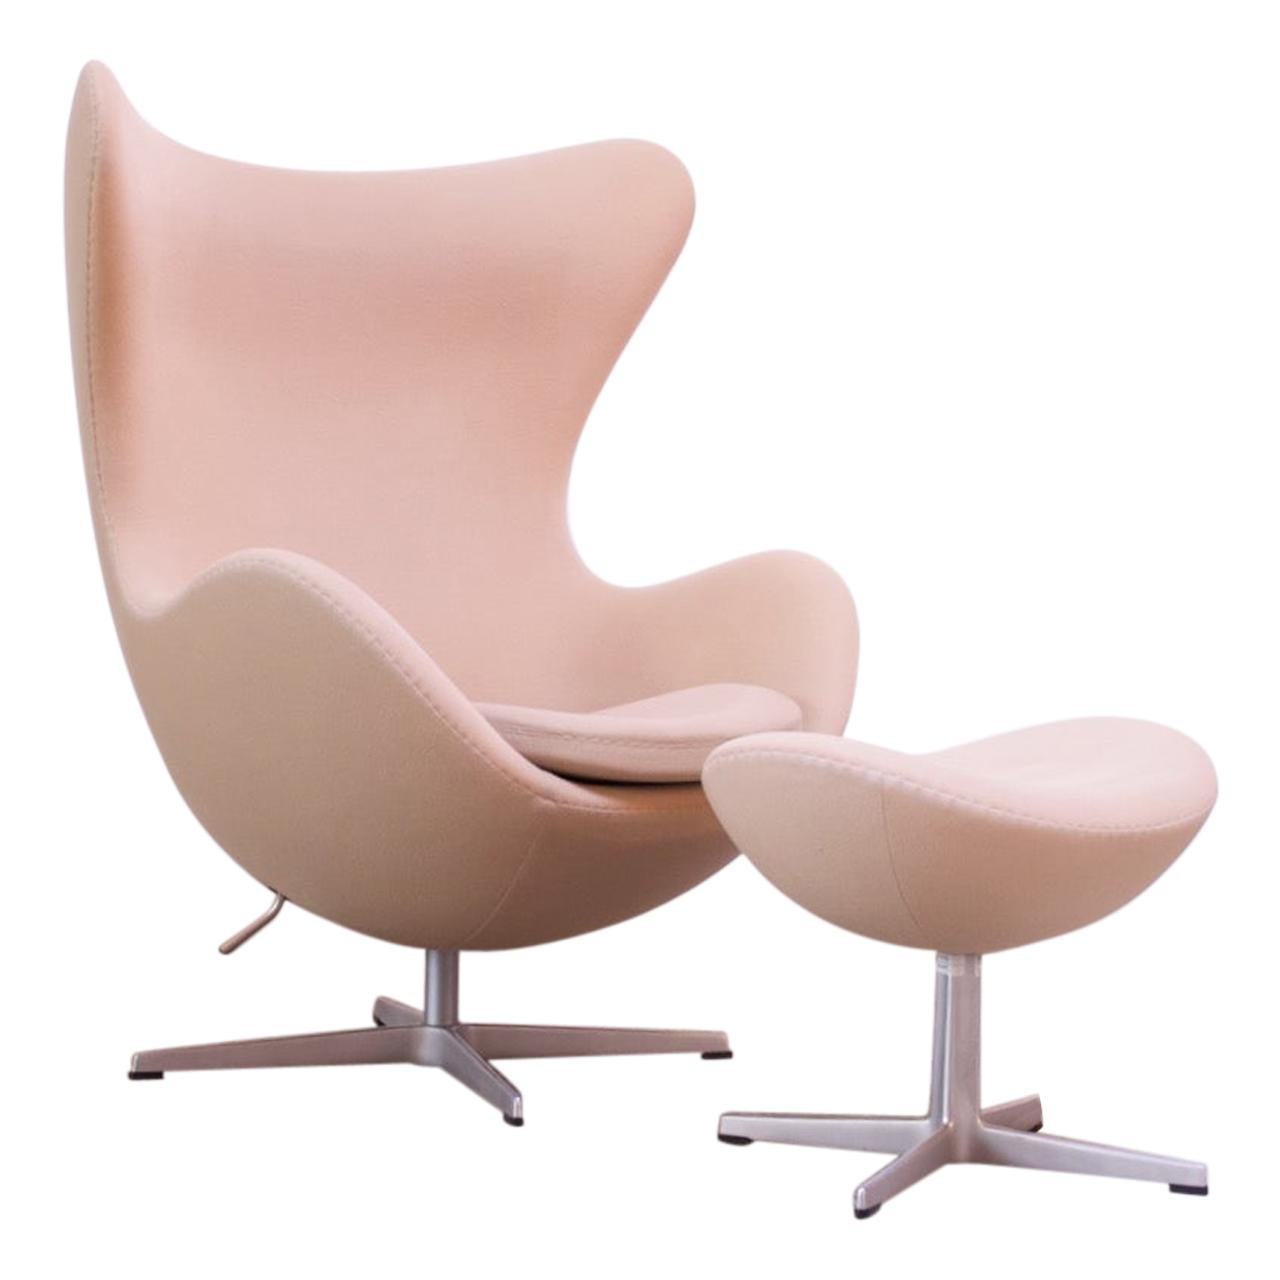 Arne Jacobsen for Fritz Hansen Egg Chair and Ottoman Distributed by Knoll